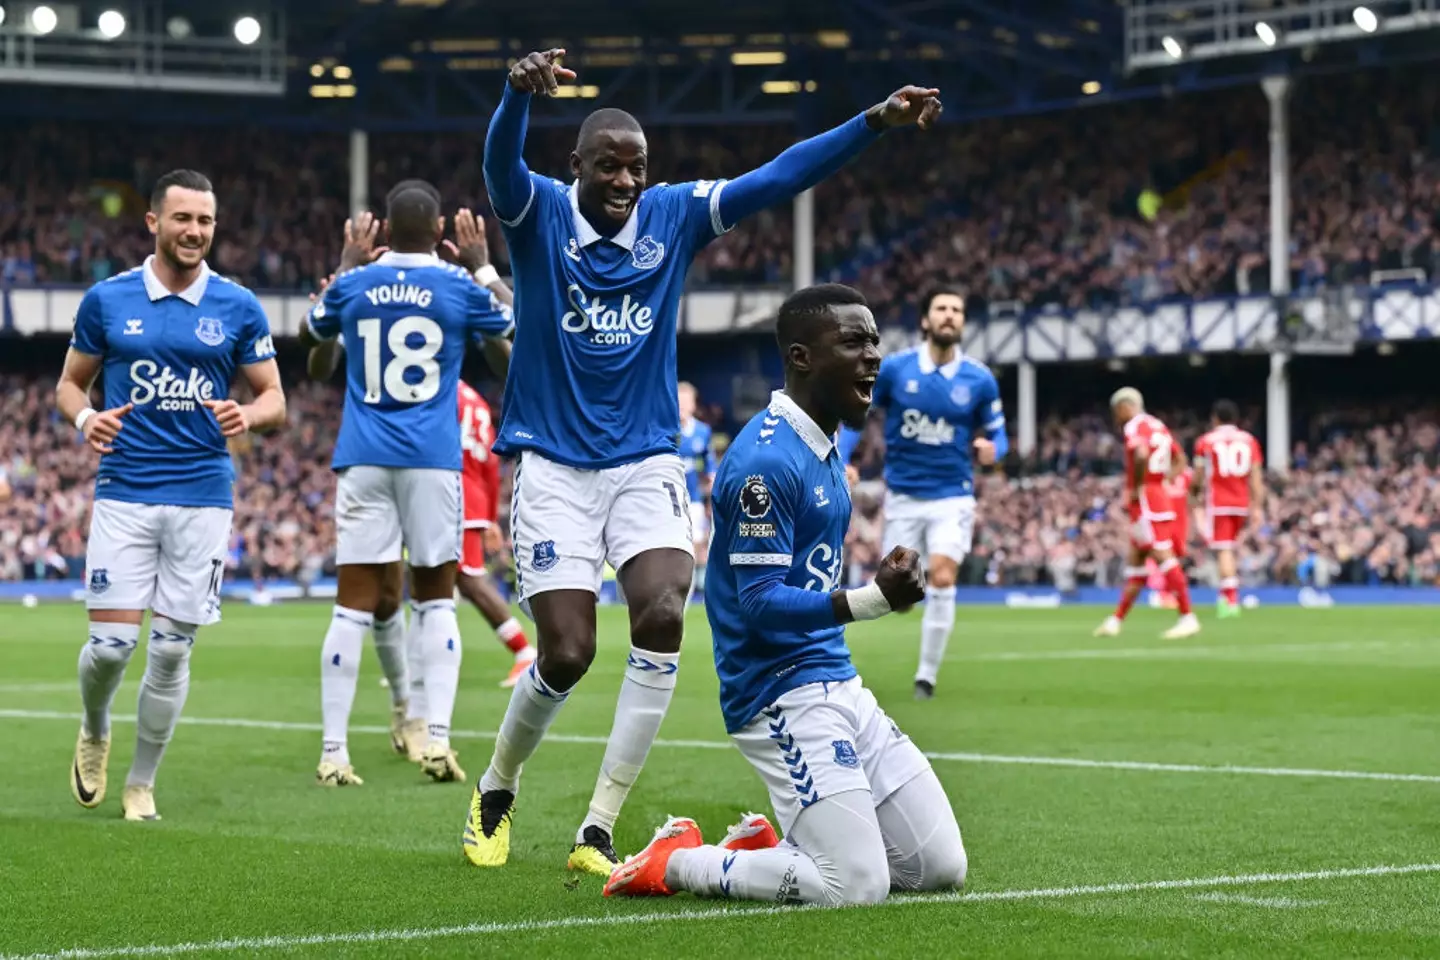 Everton's improved form in recent months has seen them avoid relegation - Getty